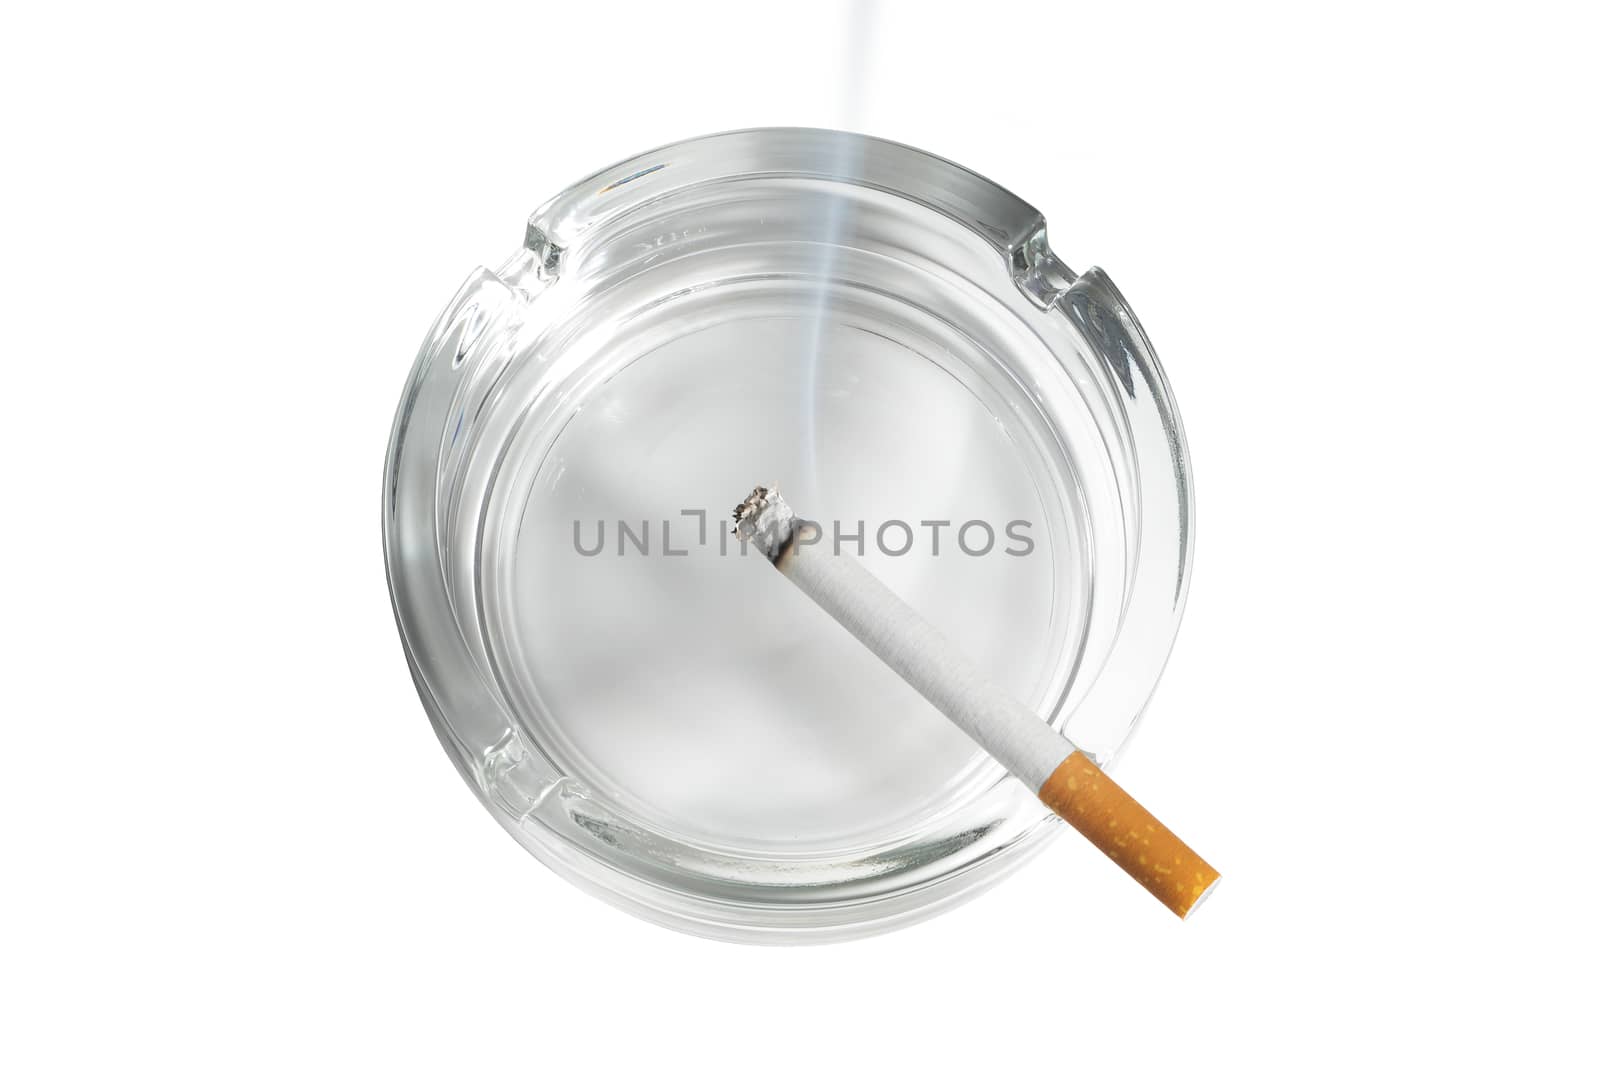 The top view of a cigarette lit in glass ashtray on white